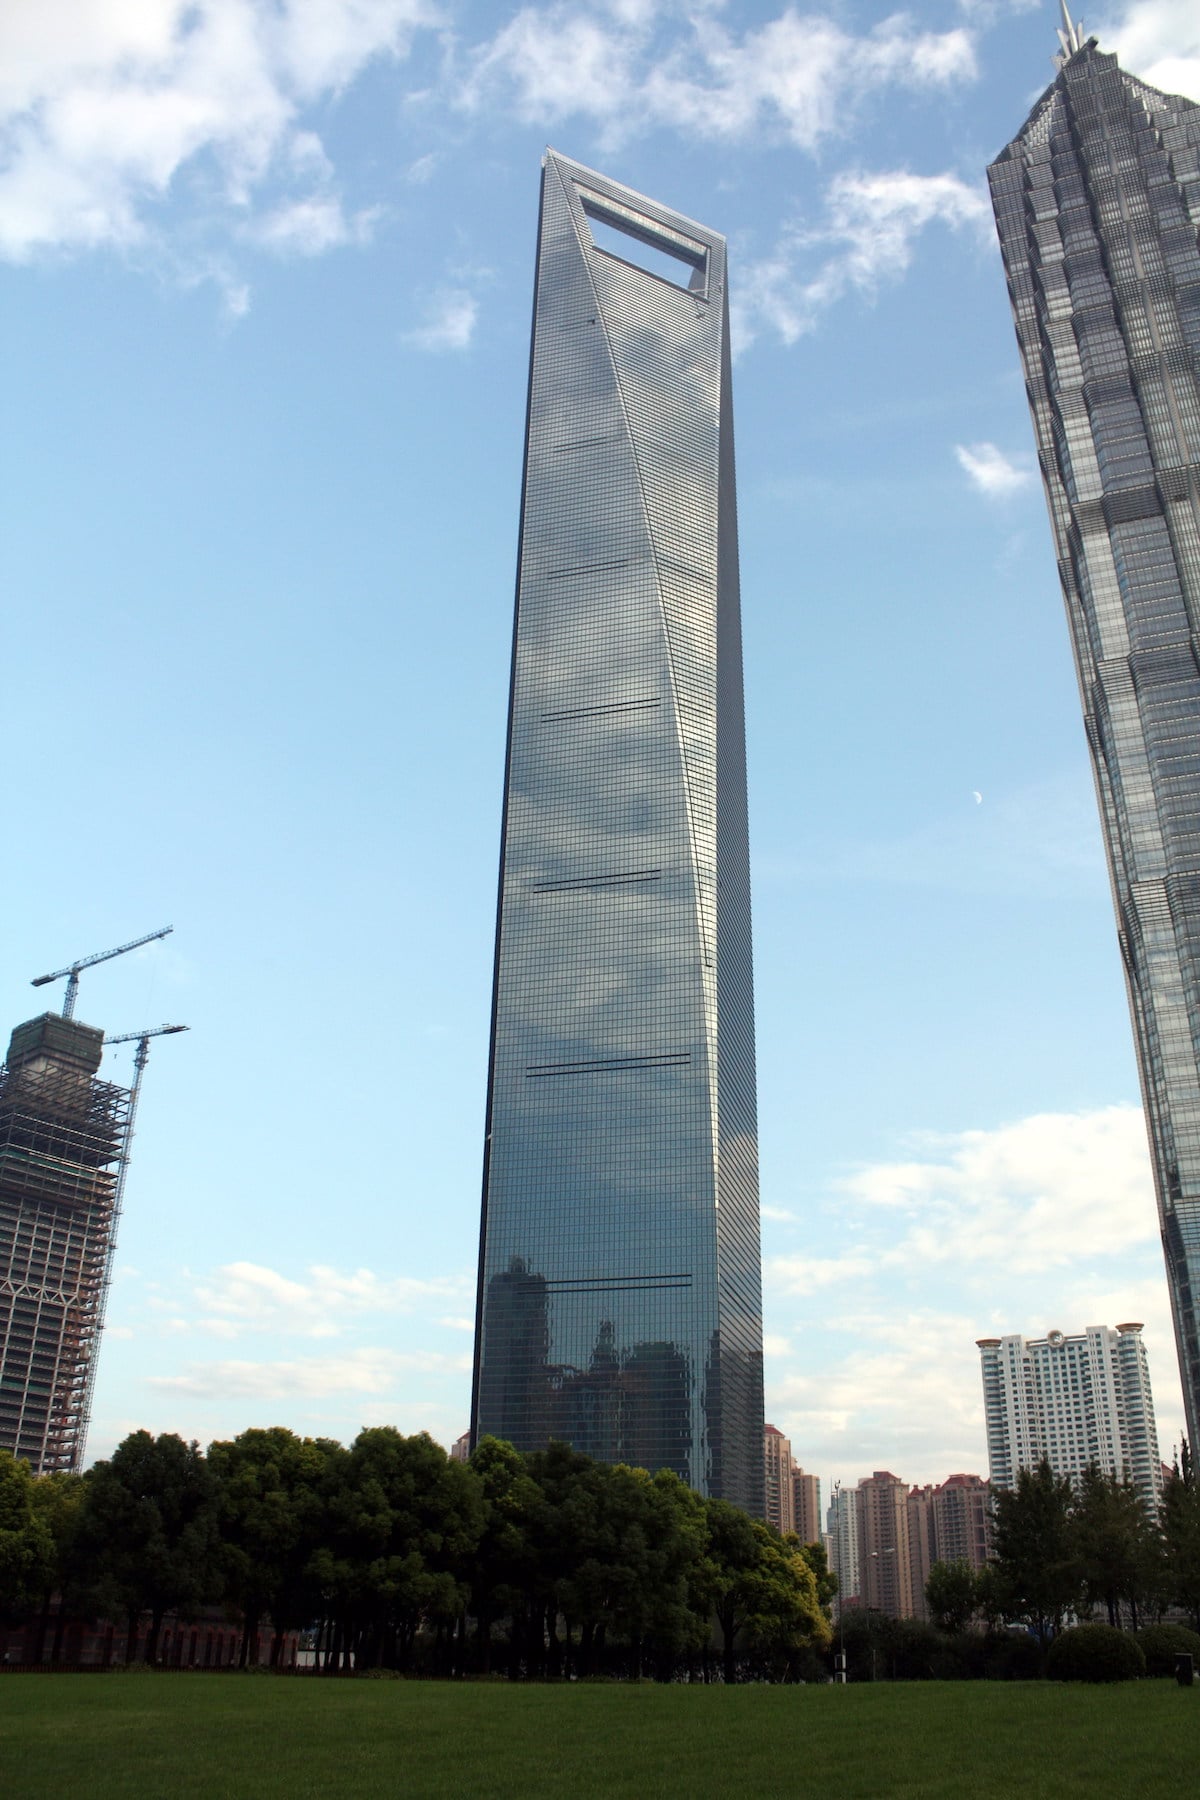 15 Skyscrapers That Are the Tallest Buildings in the World